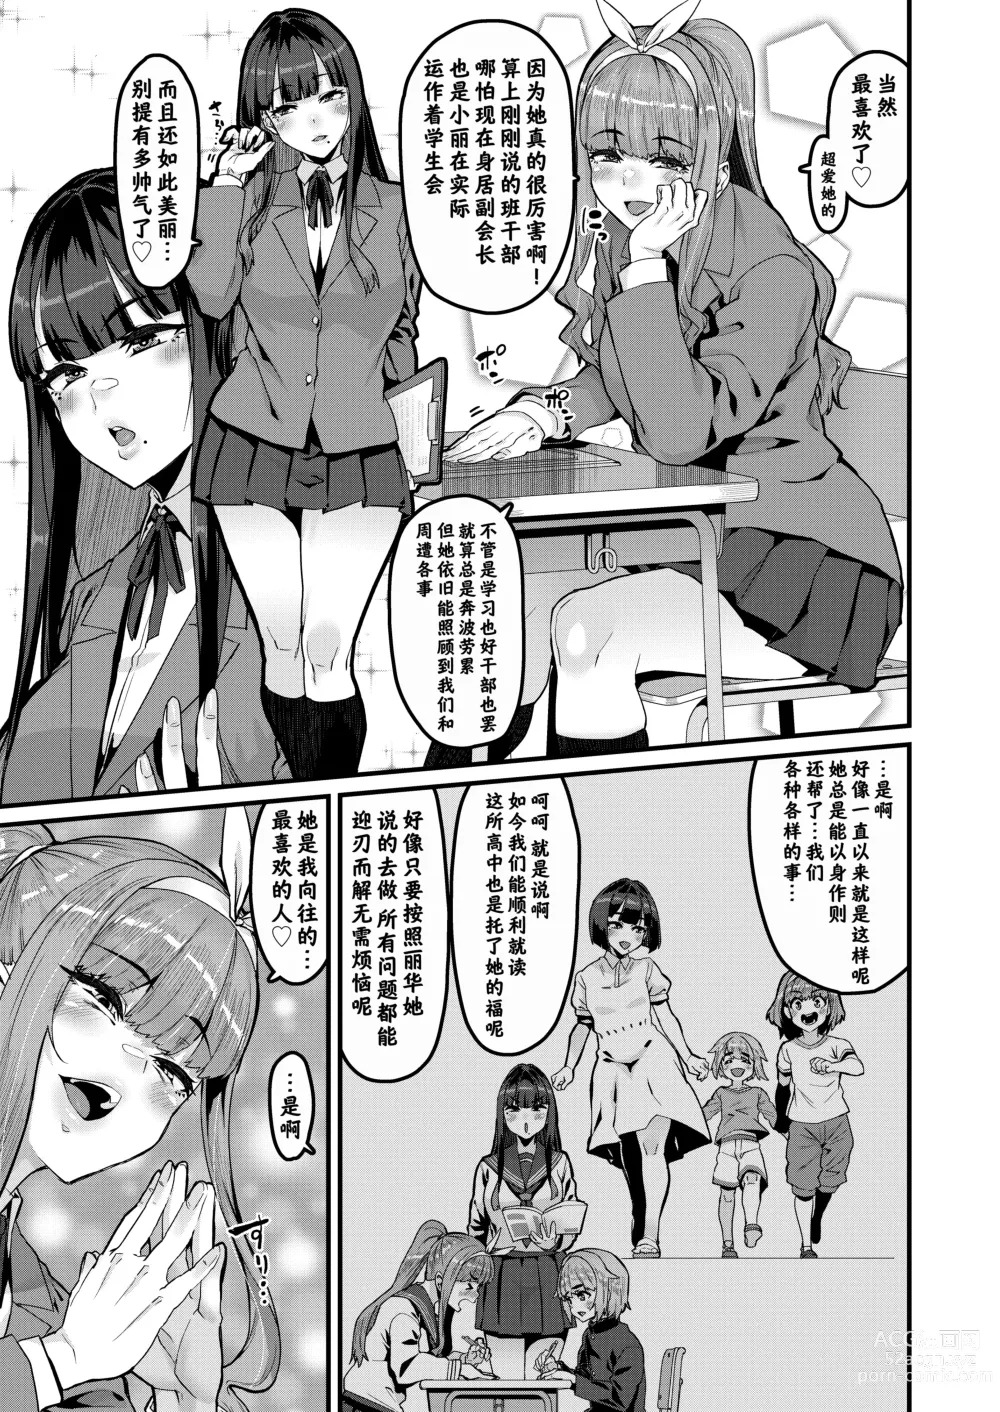 Page 4 of doujinshi 青梅竹马到此为止